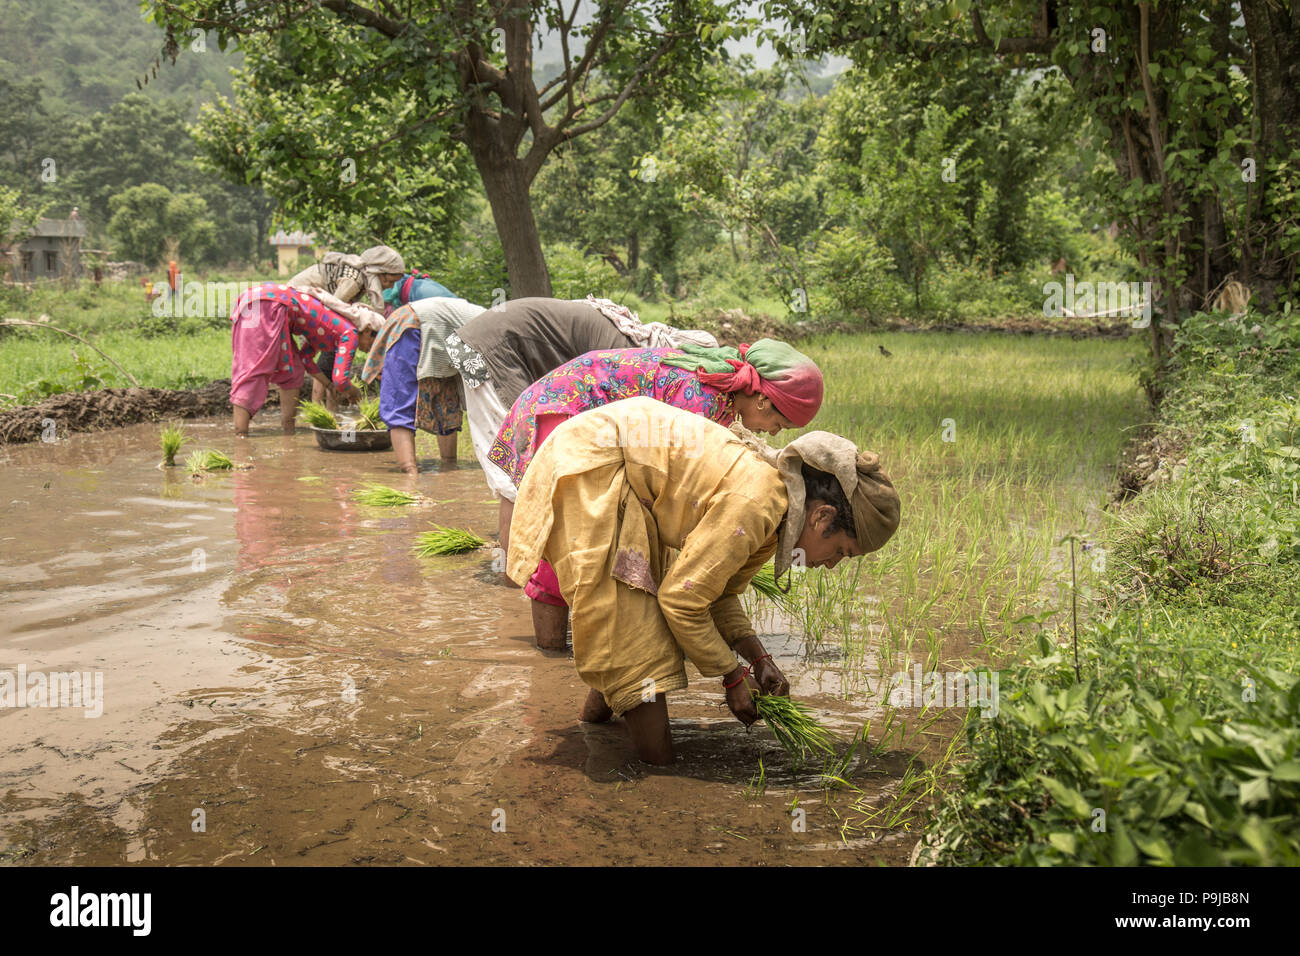 Group Of Indian Village Woman Farmers Working In A Paddy Field Stock